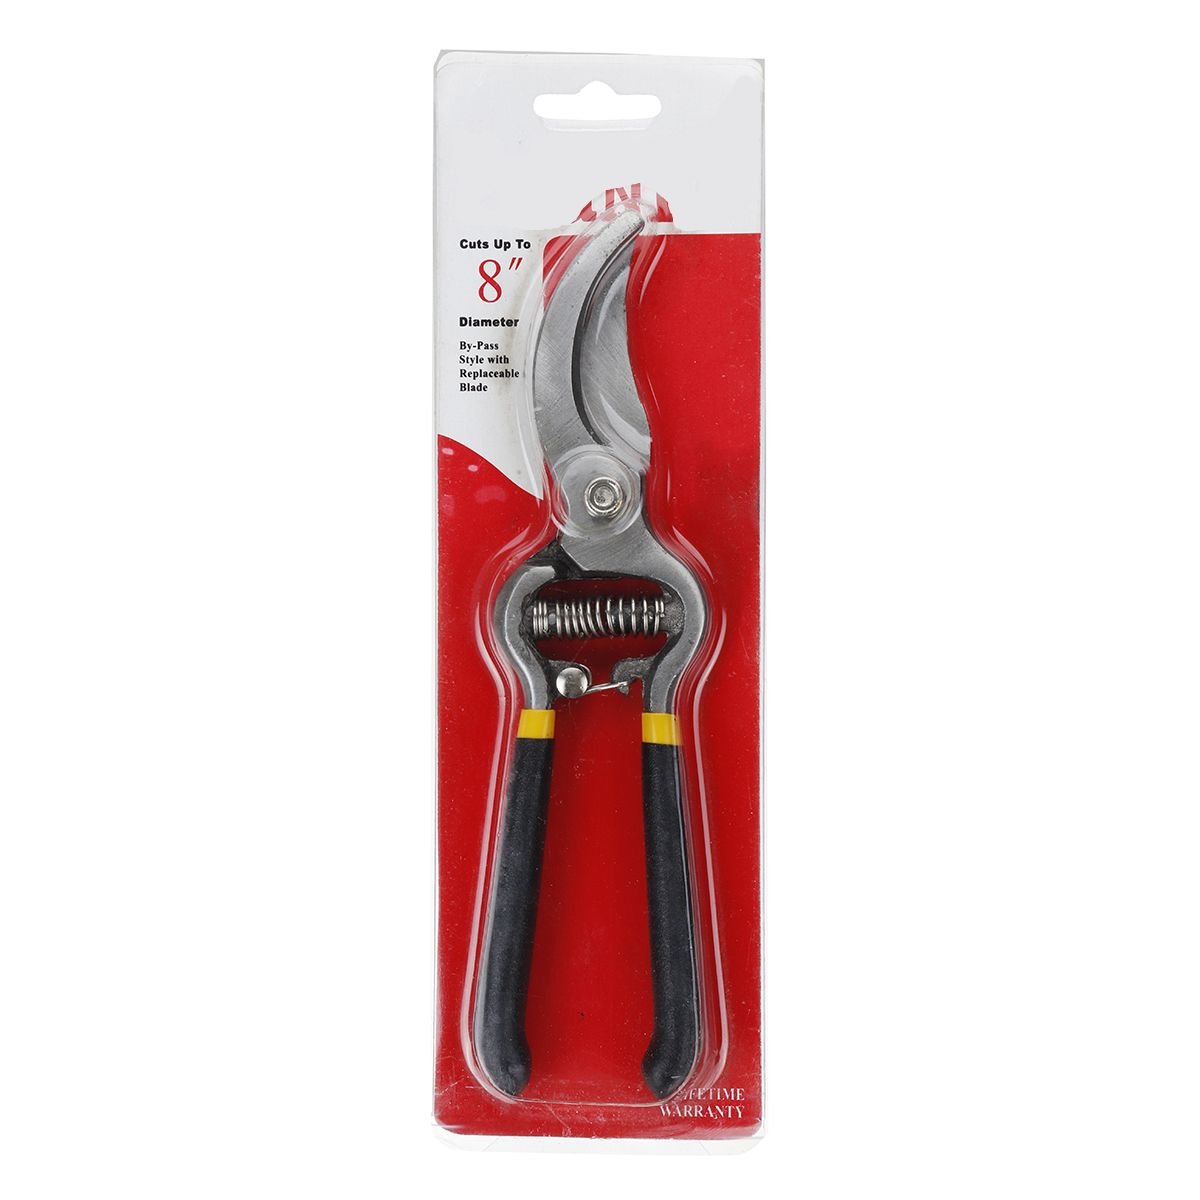 8inch-Carbon-Steel-Professional-Loppers-Garden-Cutter-Bypass-Tree-Pruning-Shears-Clippers-1412616